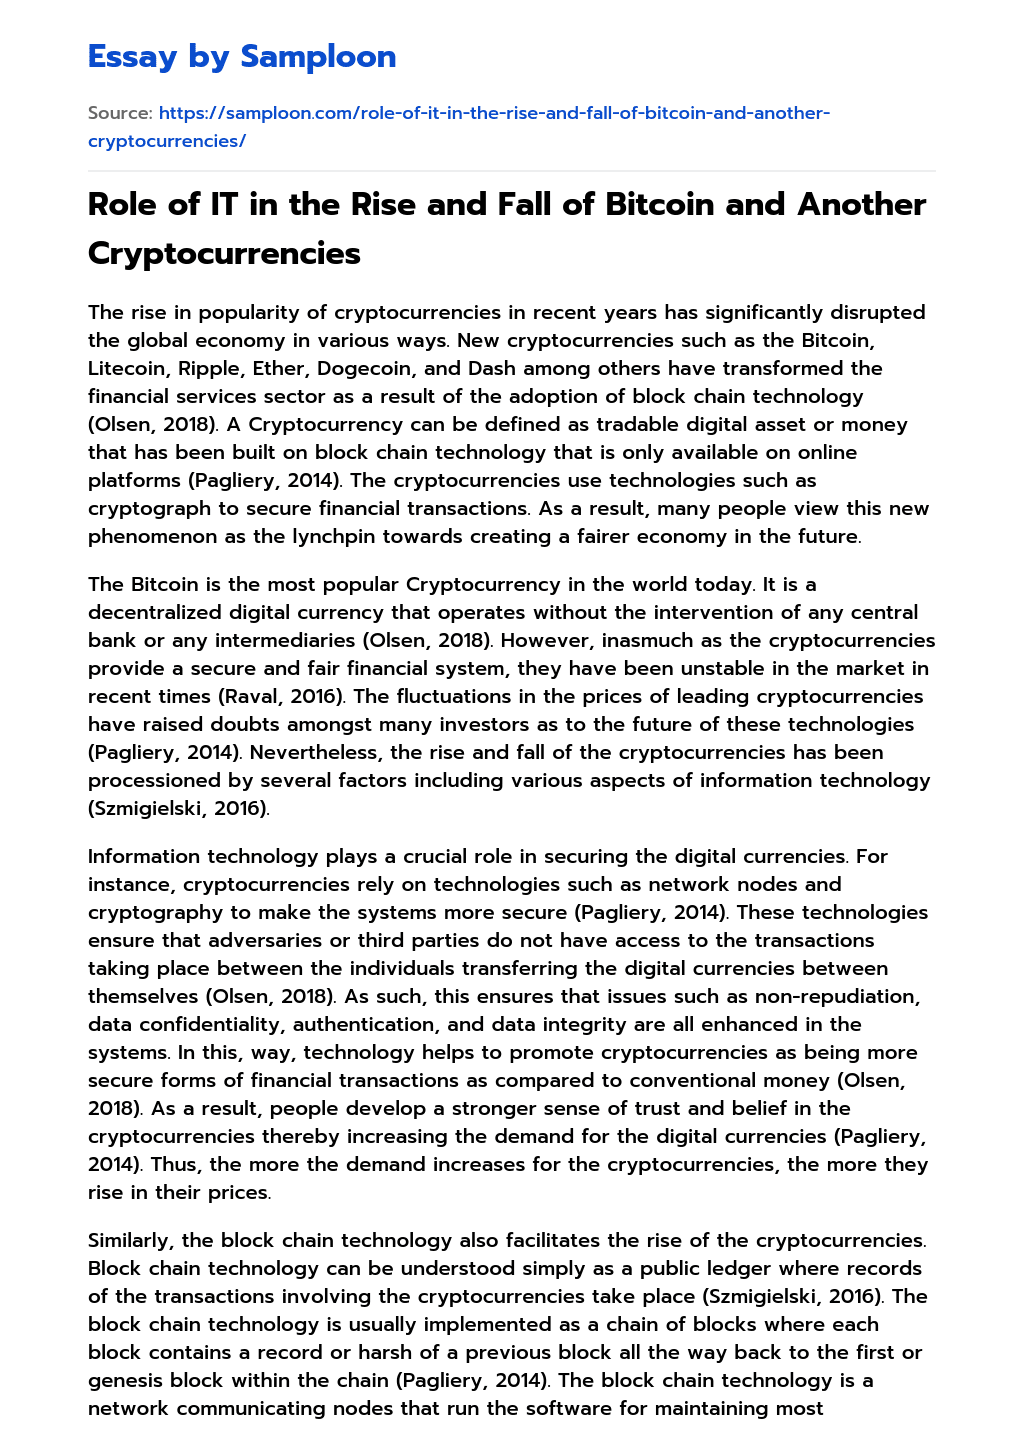 Role of IT in the Rise and Fall of Bitcoin and Another Cryptocurrencies essay